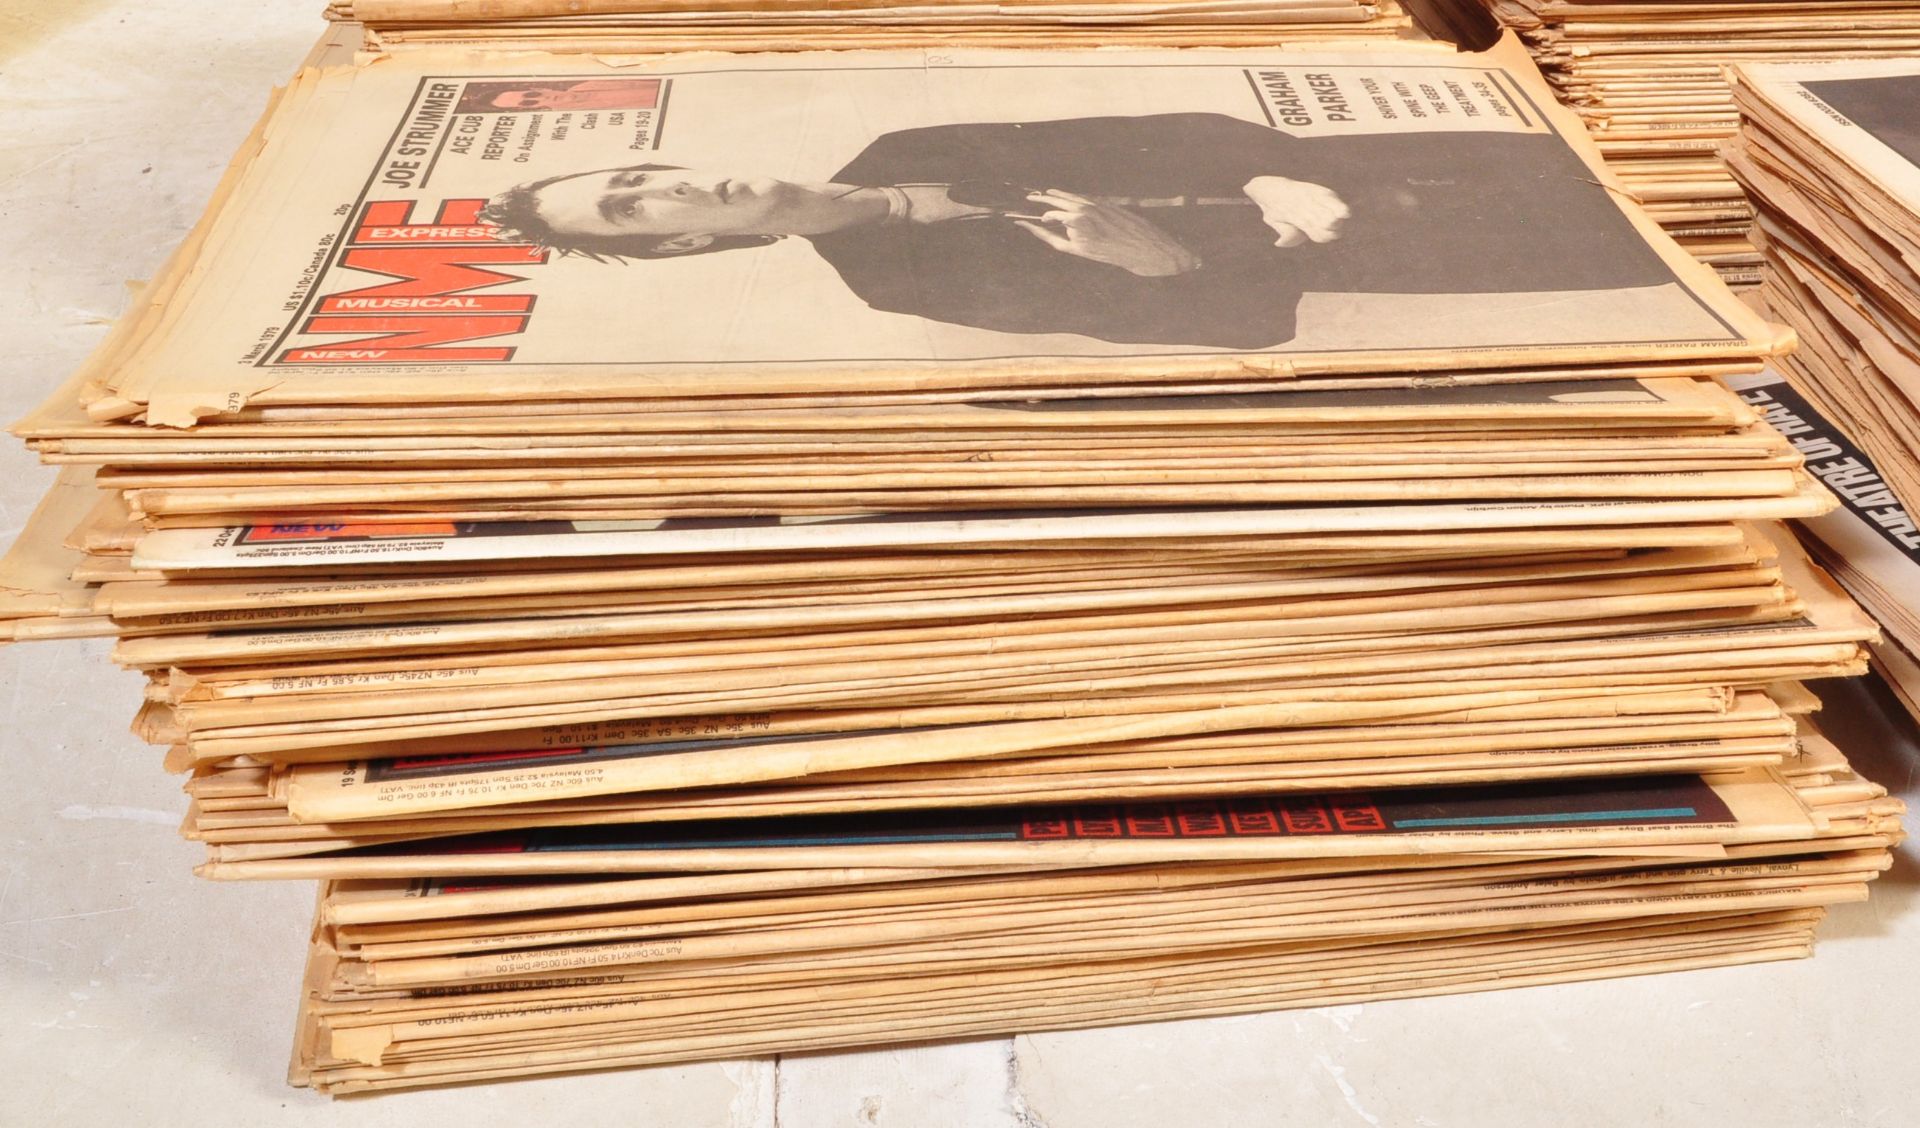 NME - NEW MUSIC EXPRESS - MAGAZINES - LARGE COLLECTION - Bild 3 aus 10